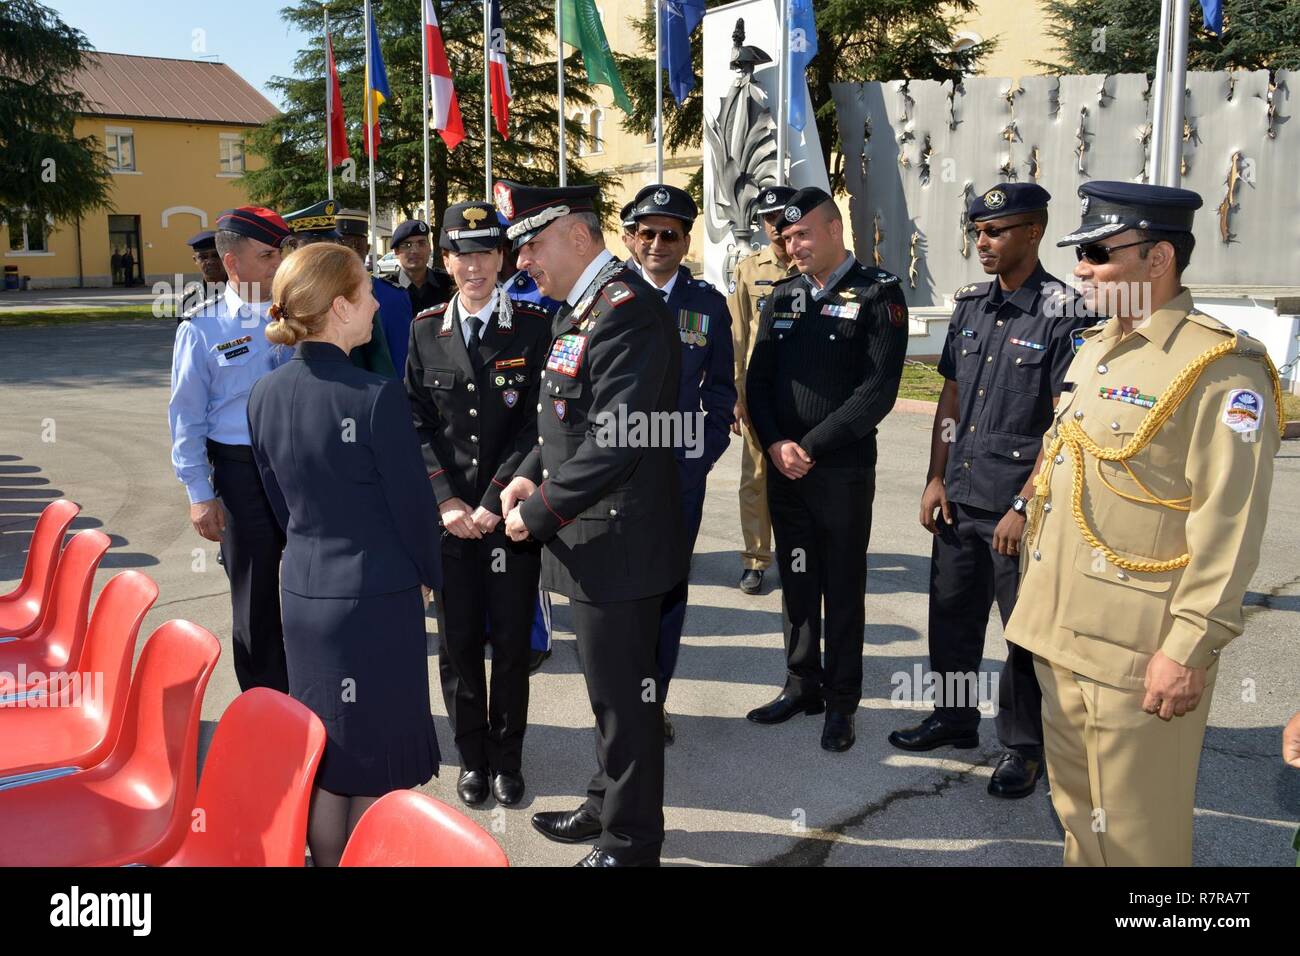 Ms. Kelly Degnan, Charge’ d’Affaires ad interim U.S. Embassy & Consulates Italy, greets multinational students, during visit at Center of Excellence for Stability Police Units (CoESPU) Vicenza, Italy, Mar. 30, 2017. Stock Photo